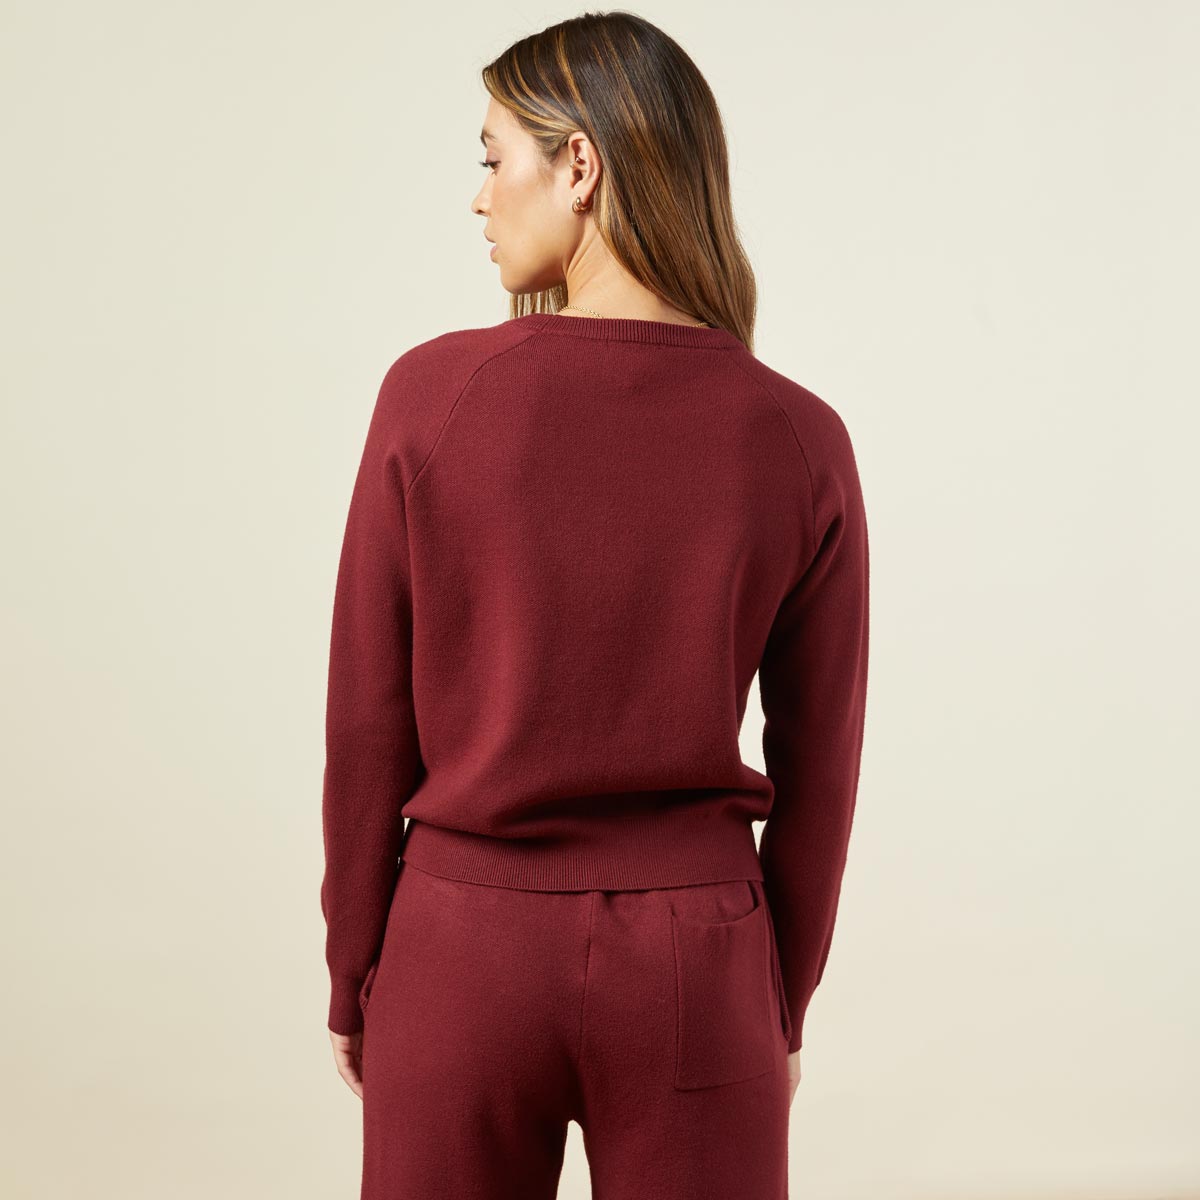 Back view of model wearing the supersoft sweater knit raglan in rhubarb.